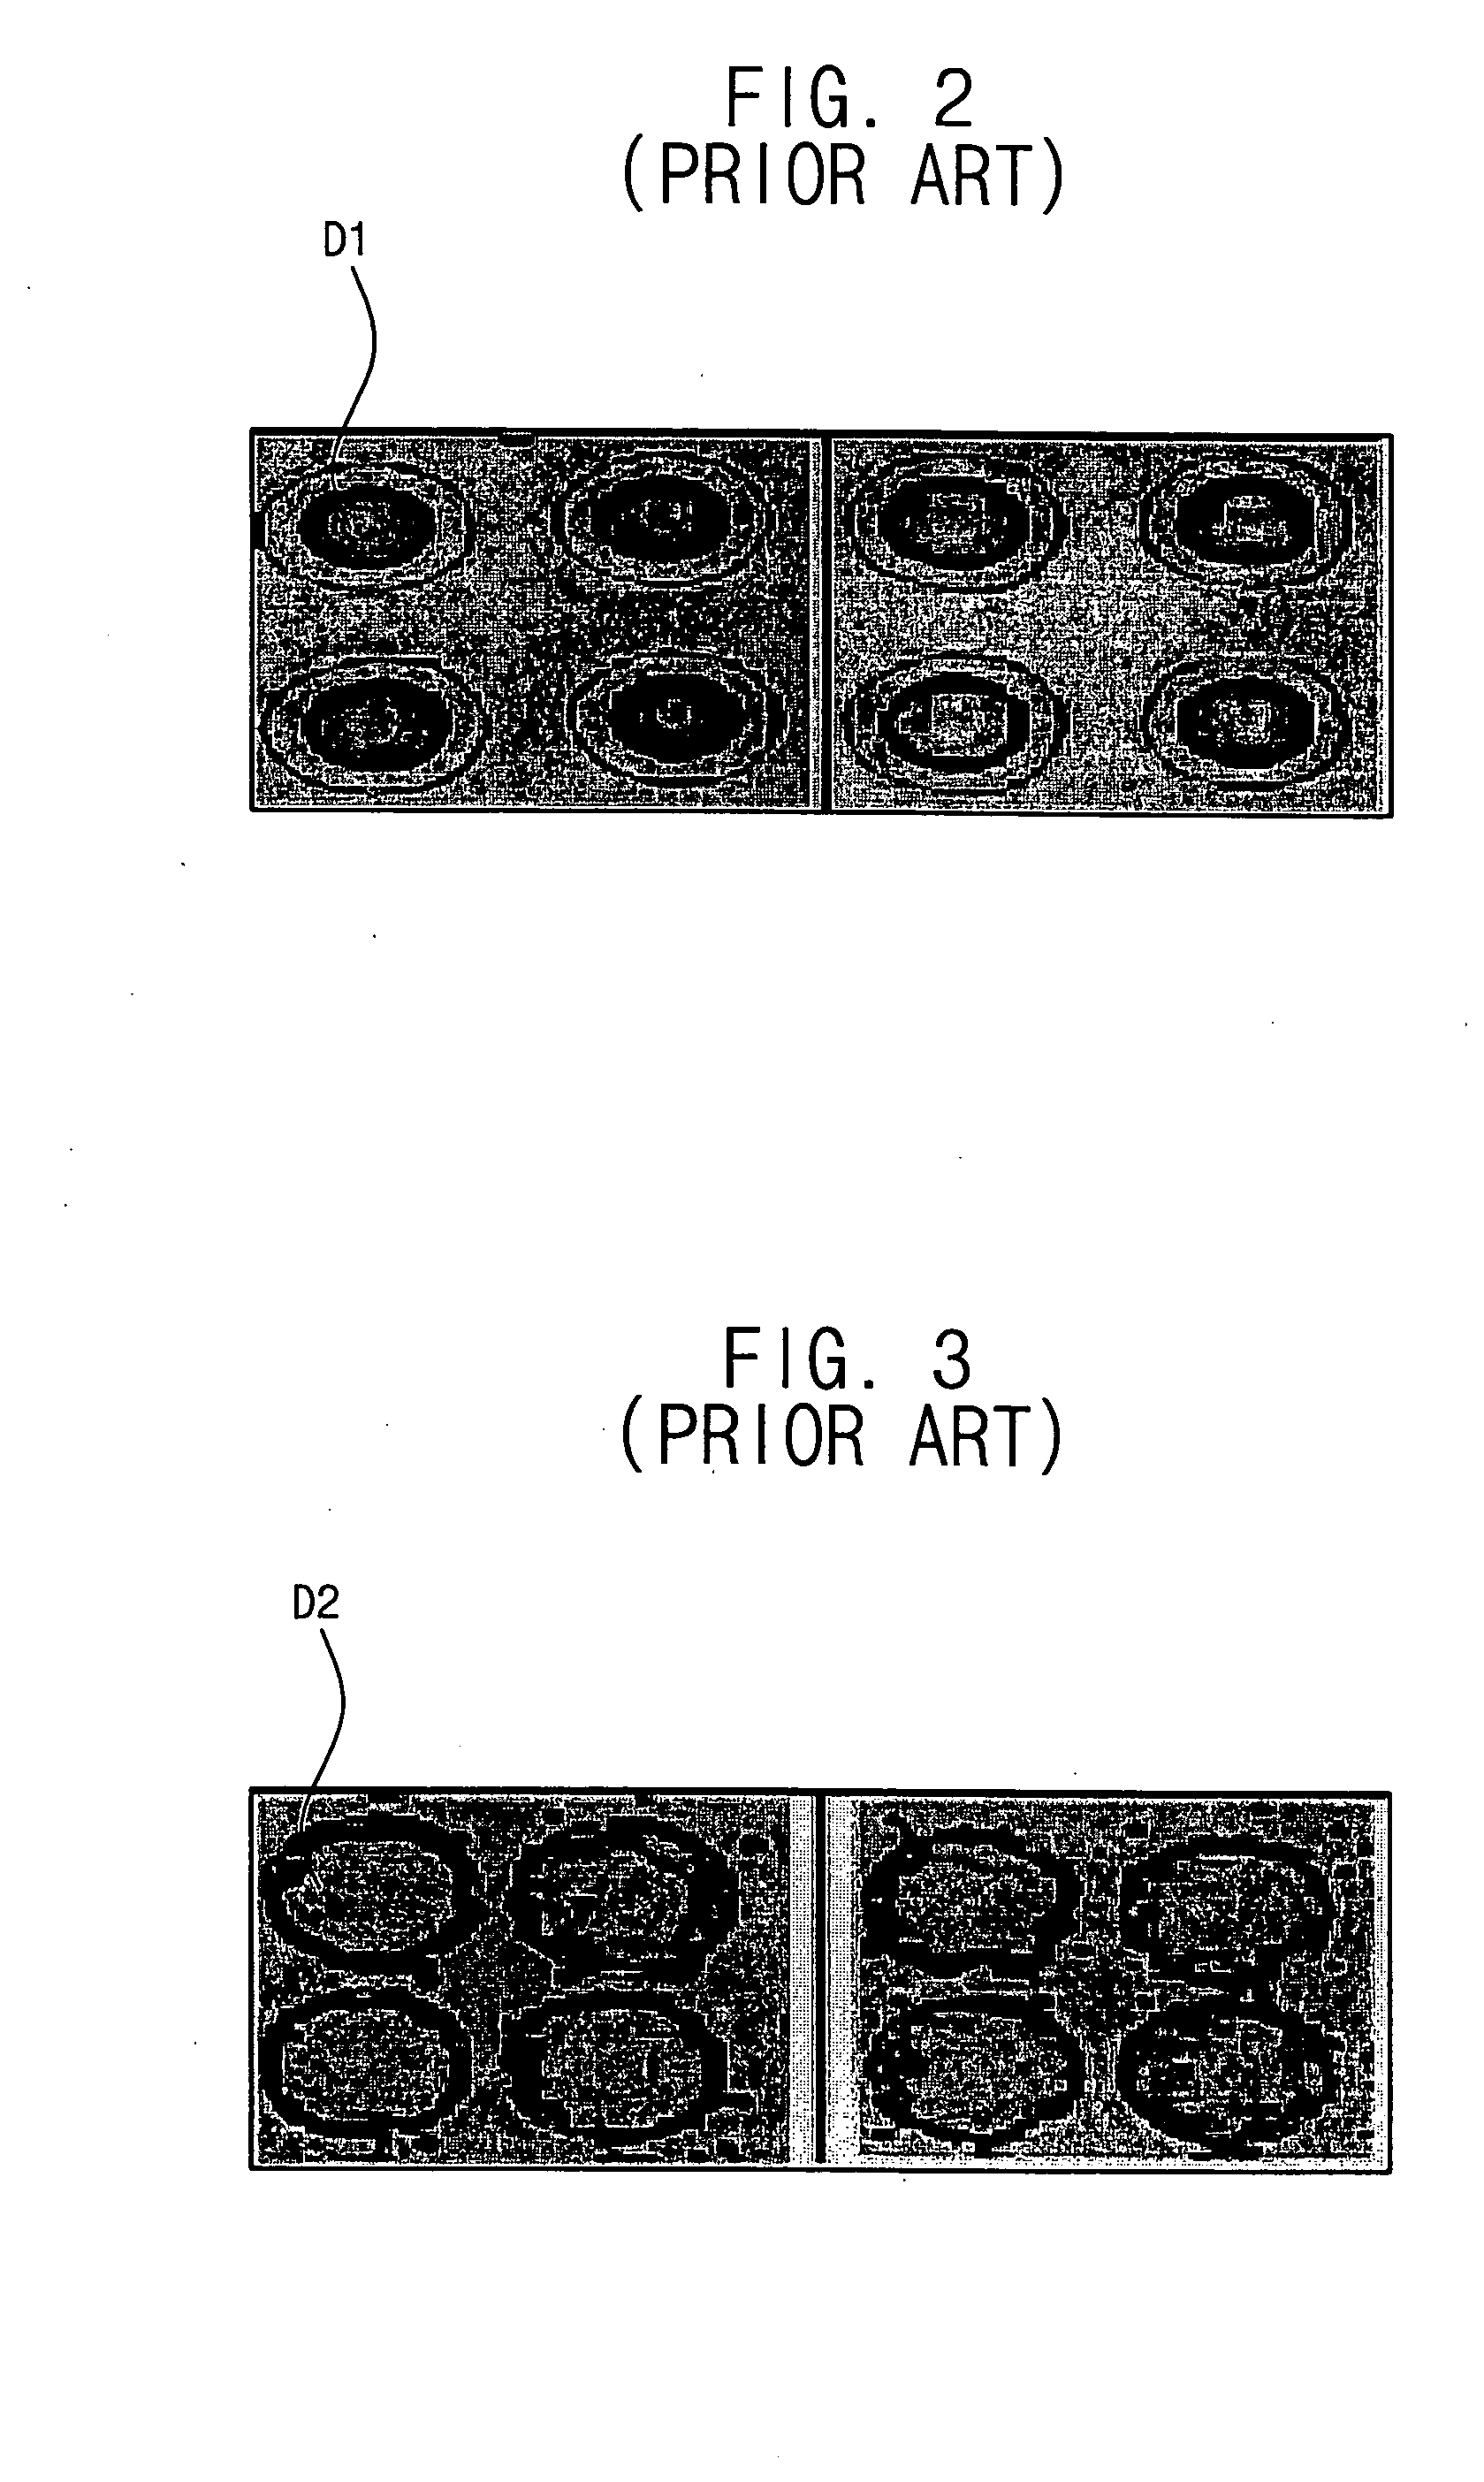 Apparatus adapted to engrave a label and related method